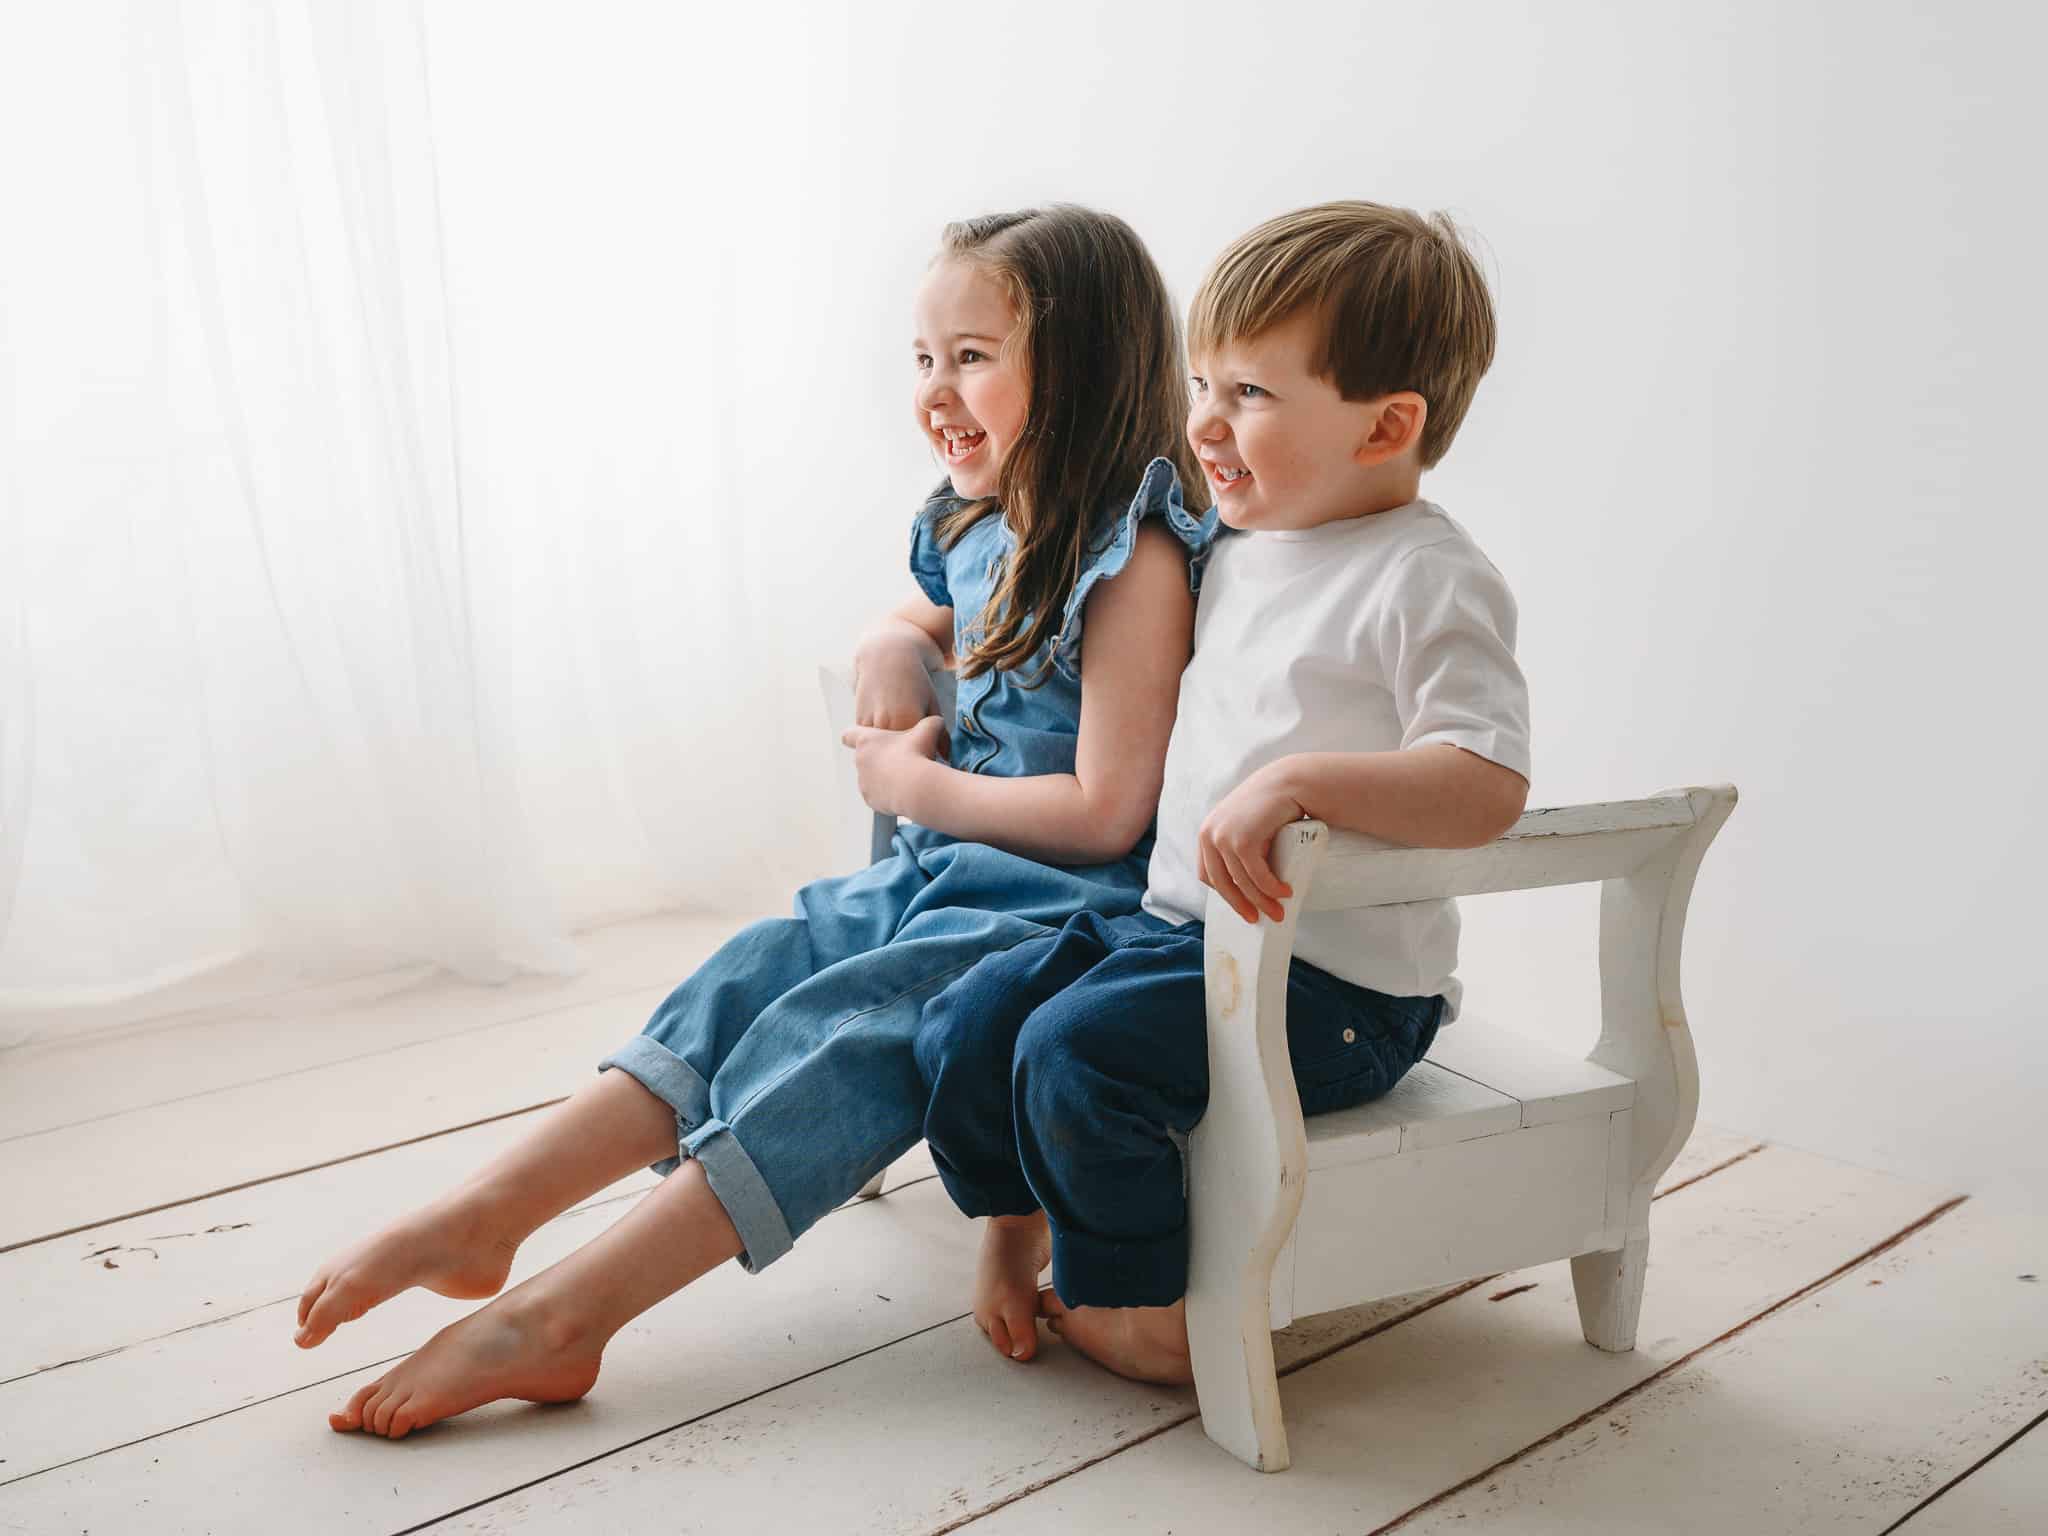 studio photograph of brother and sister sitting on a white stool looking off to the side and laughing